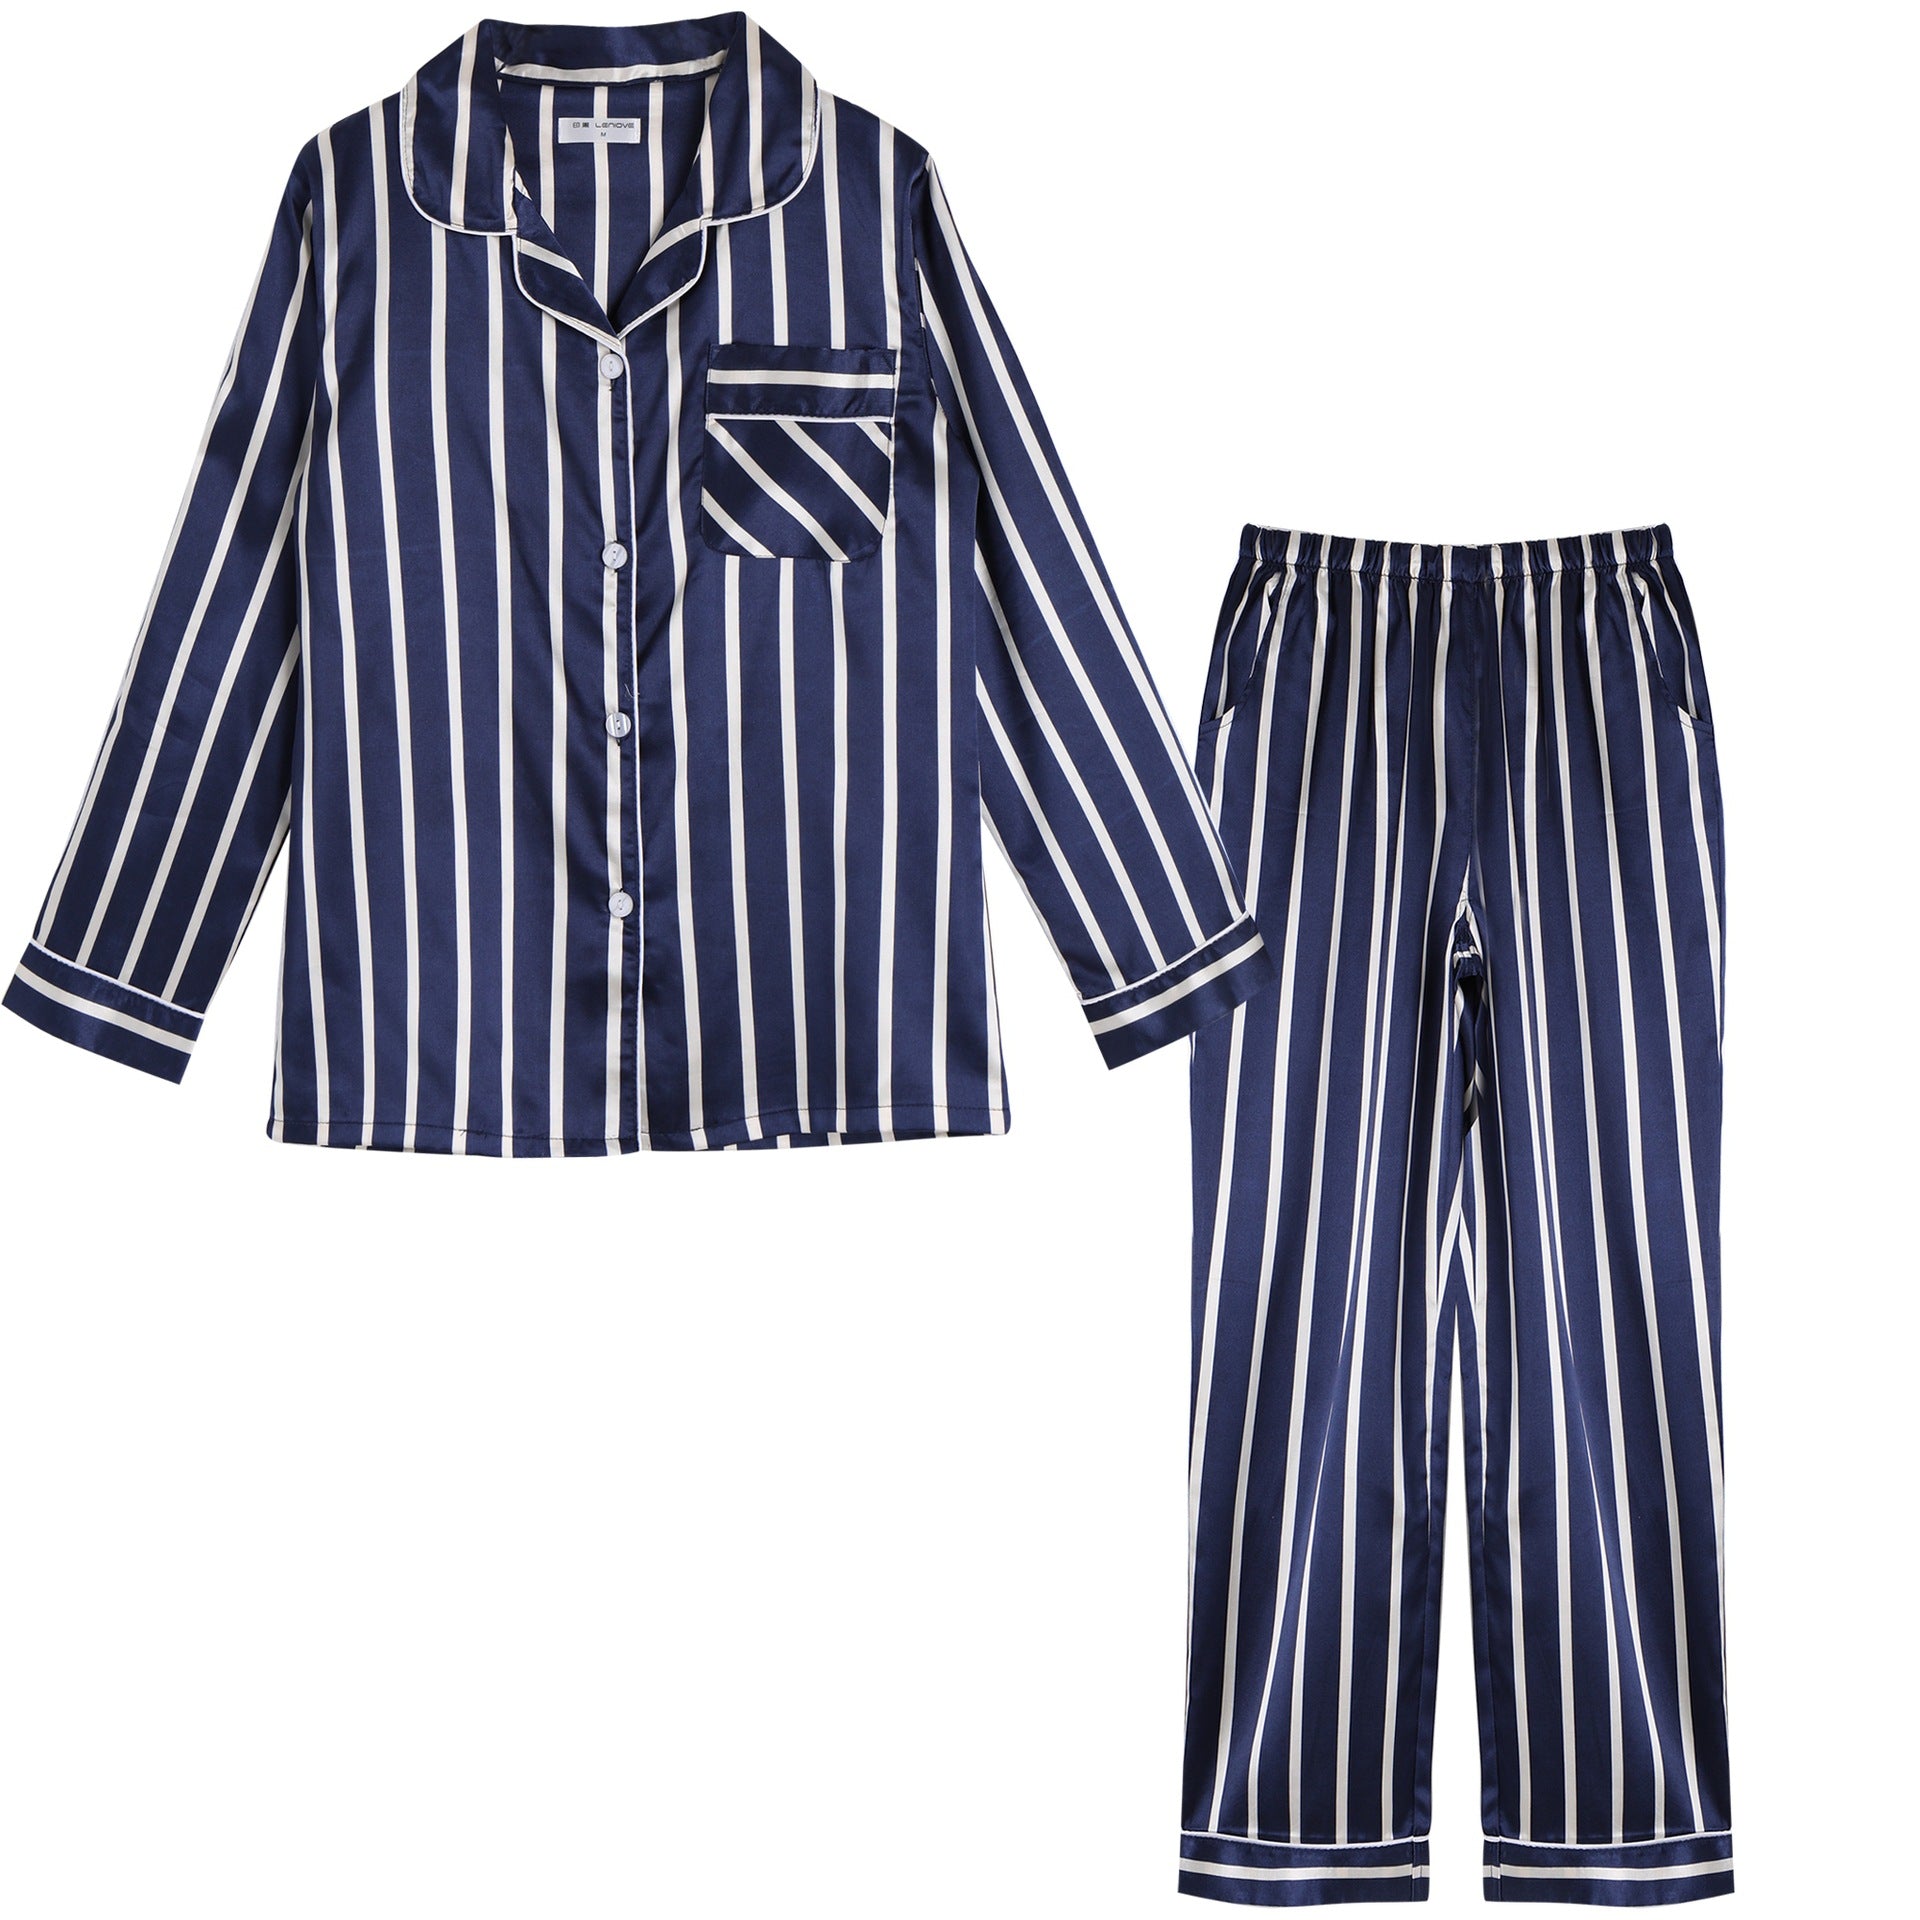 Couple striped pajamas leisure, breathable, home, cool, comfortable!.